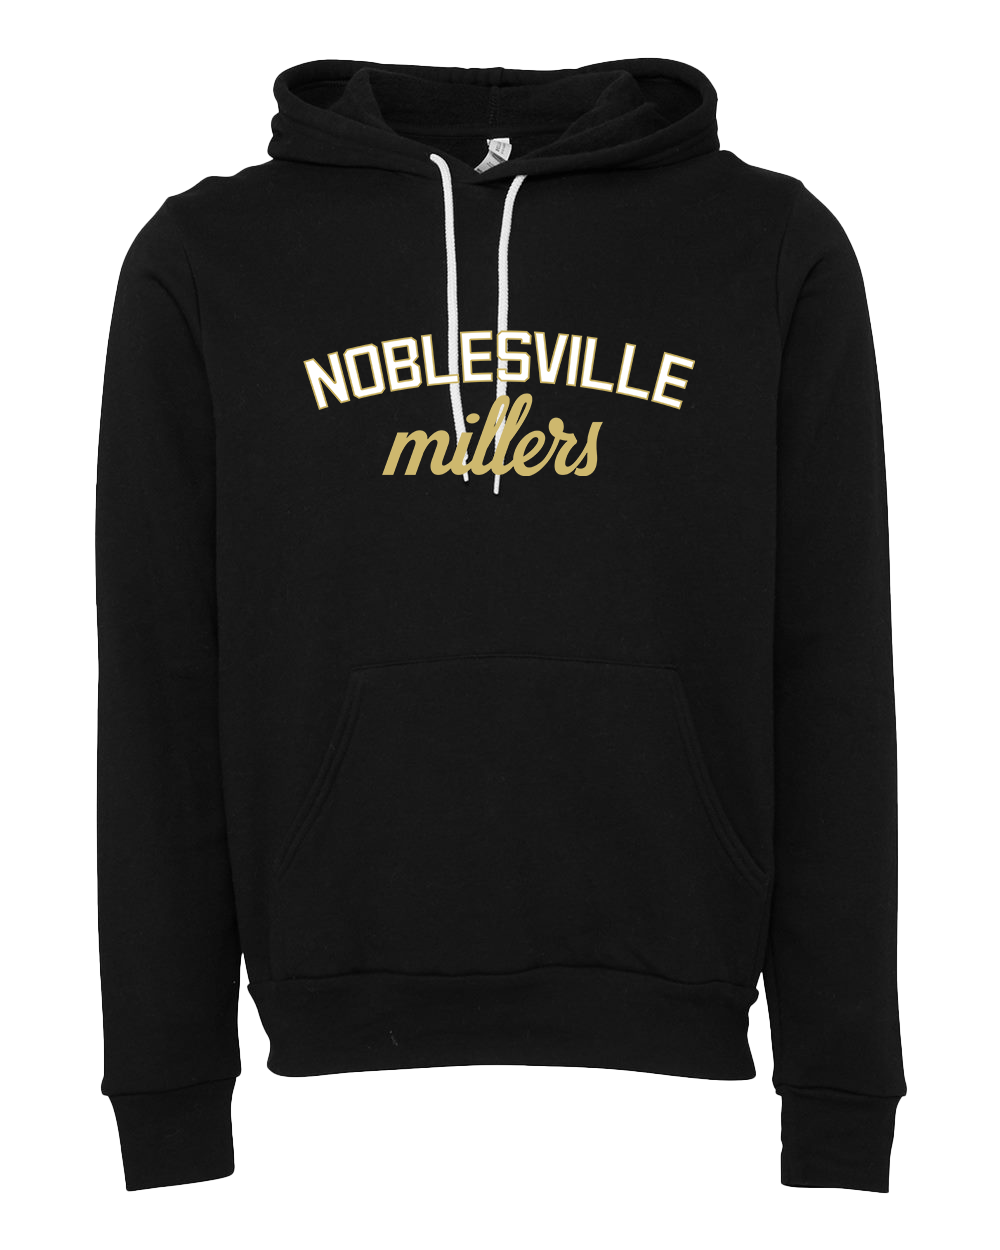 Noblesville Millers Arched Hooded Sweatshirt - Black